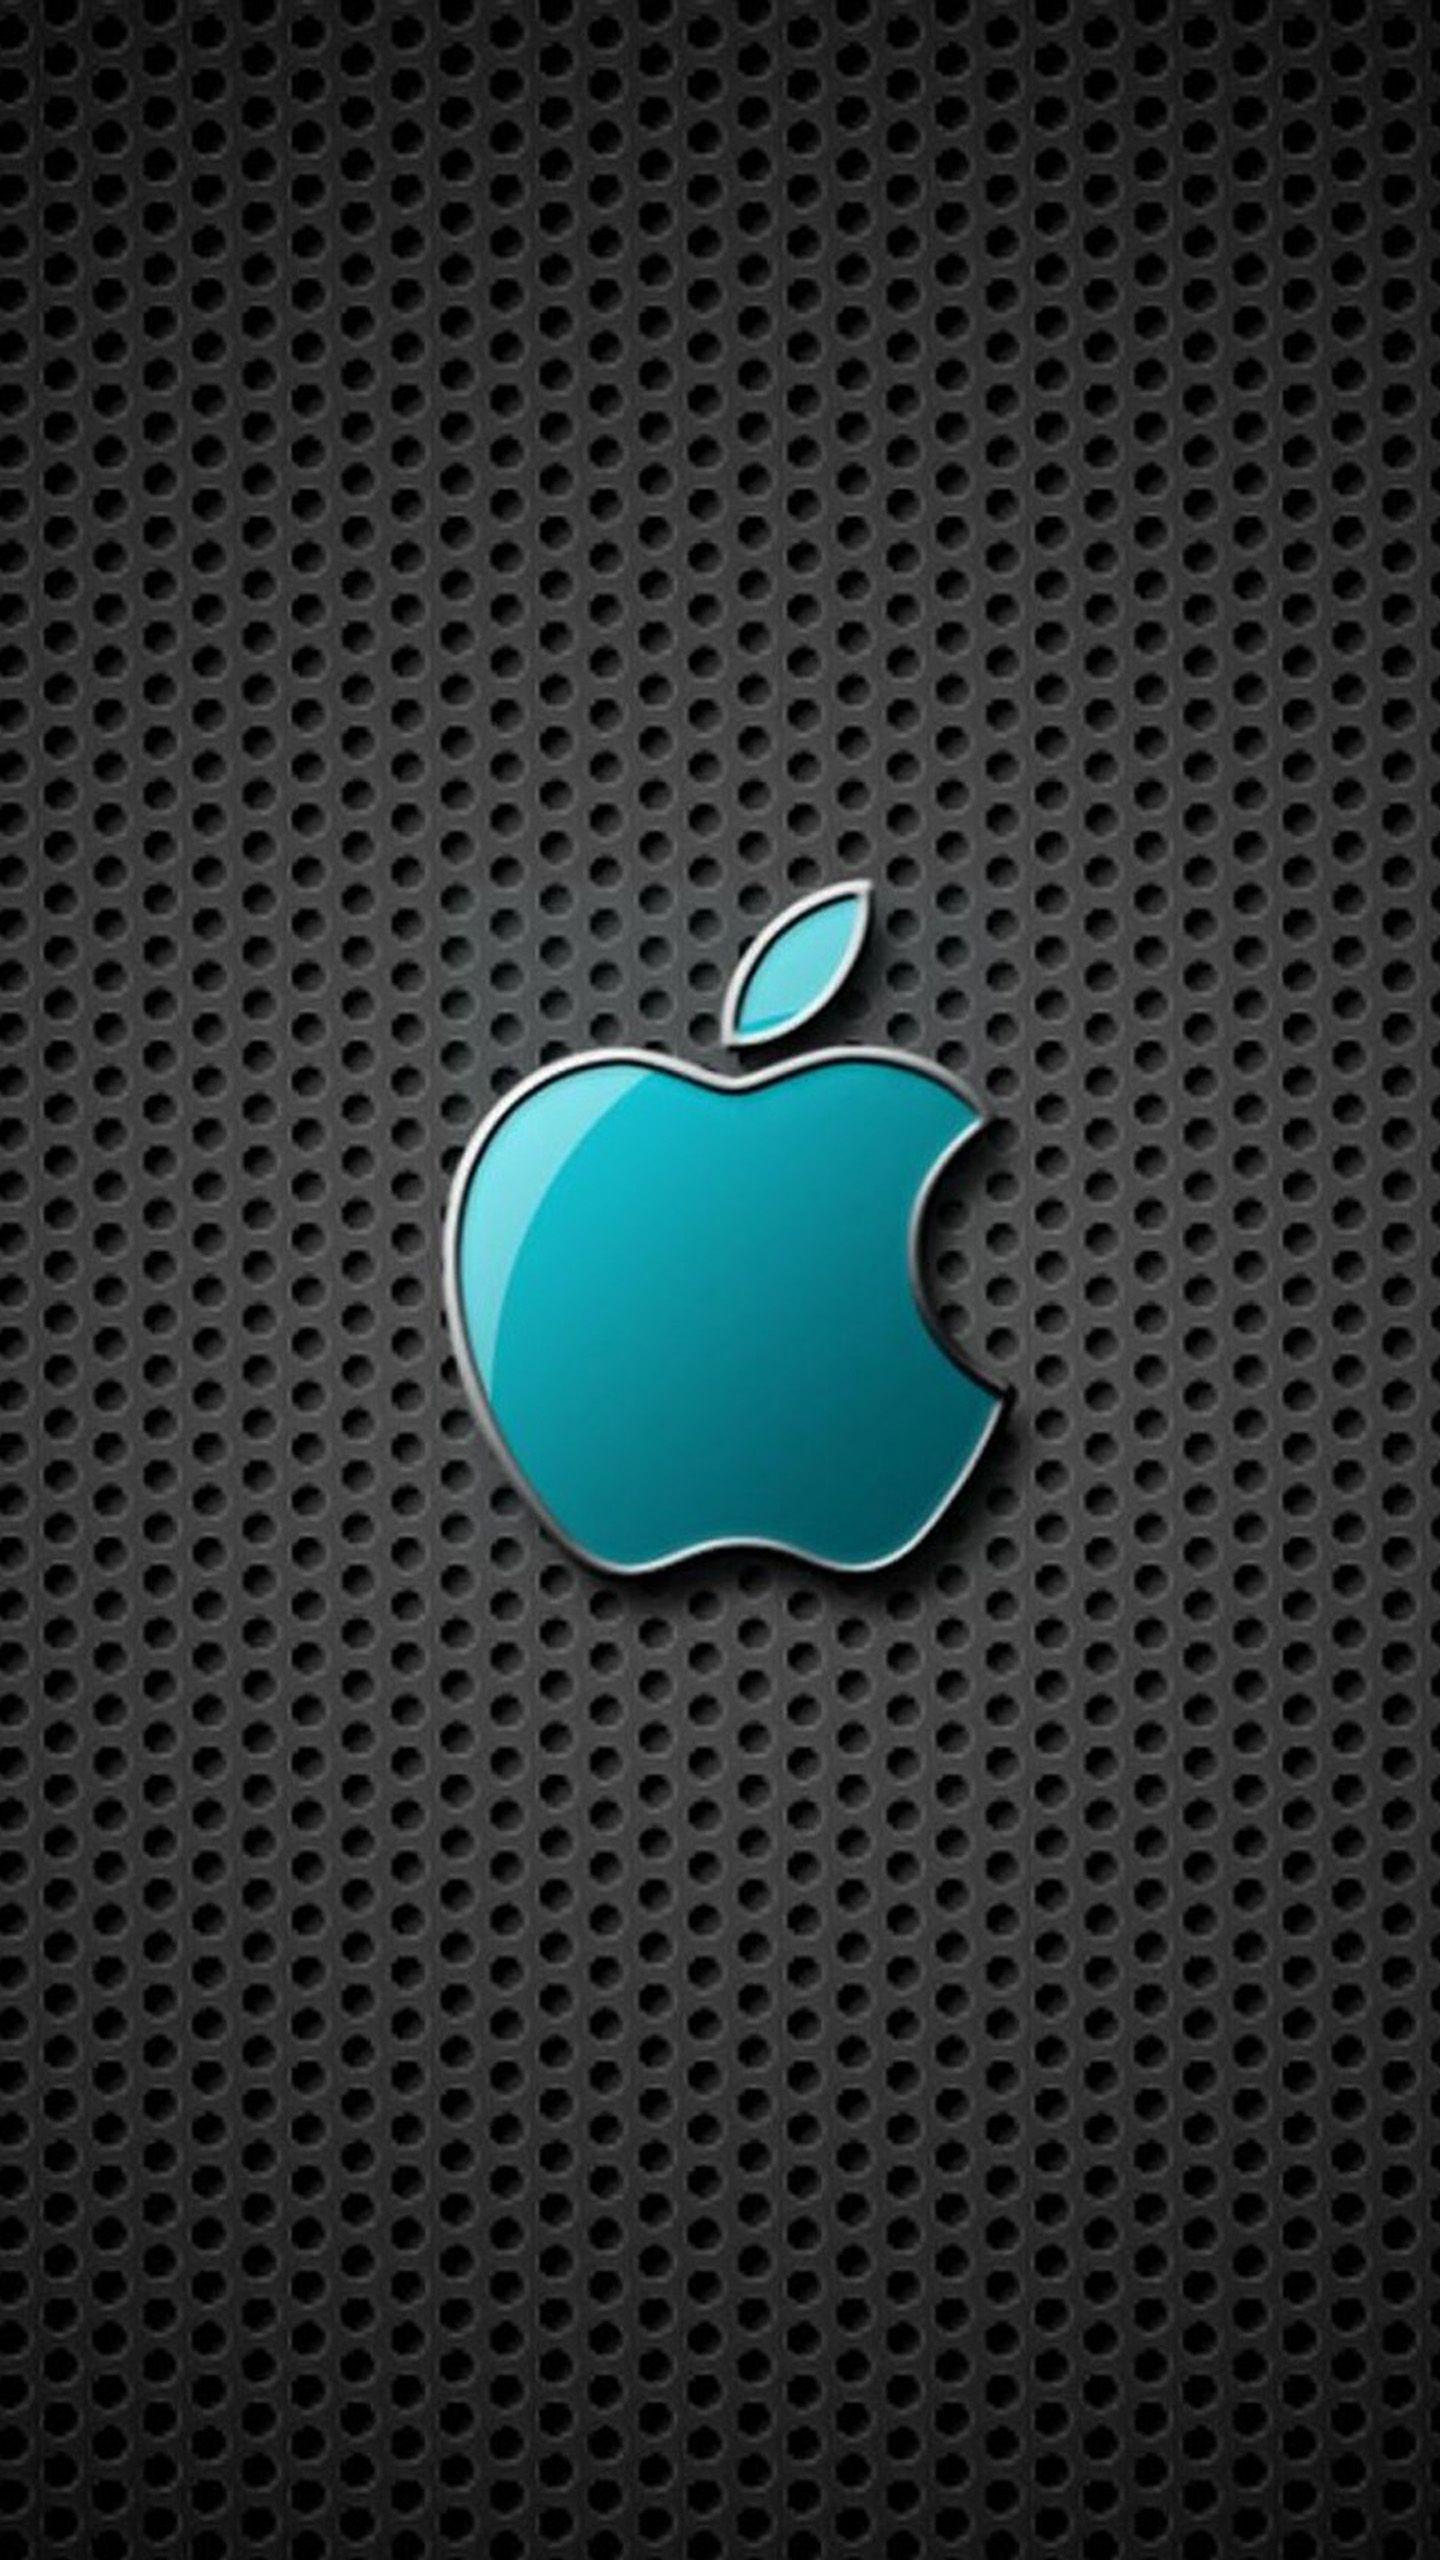 iPhone Apple HD Wallpapers - Wallpaper Cave